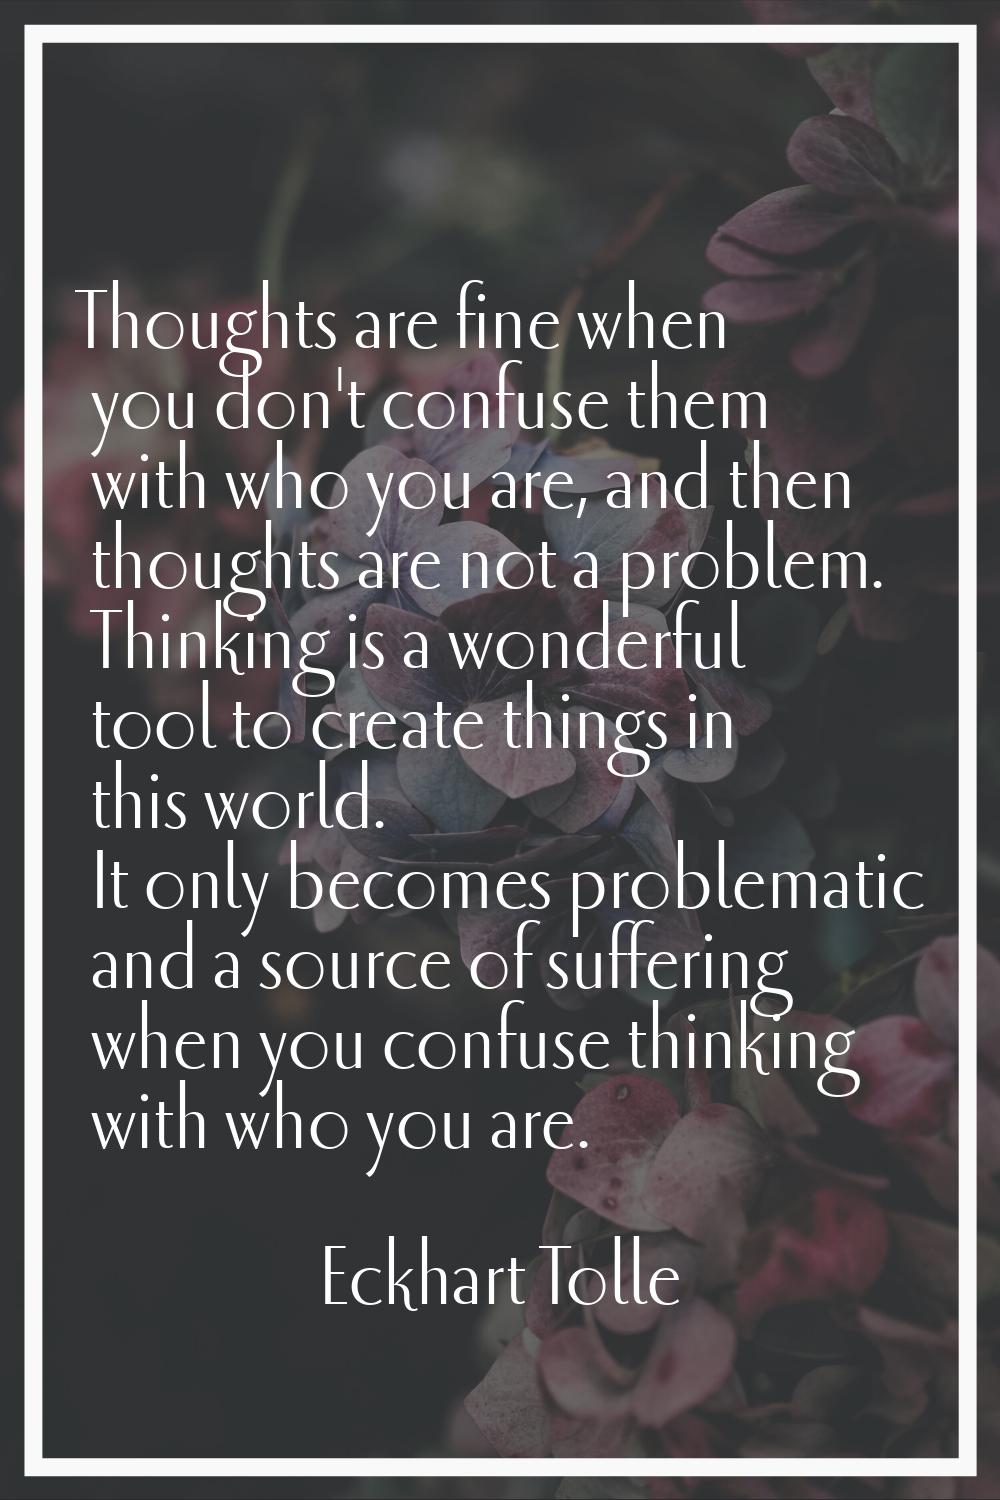 Thoughts are fine when you don't confuse them with who you are, and then thoughts are not a problem